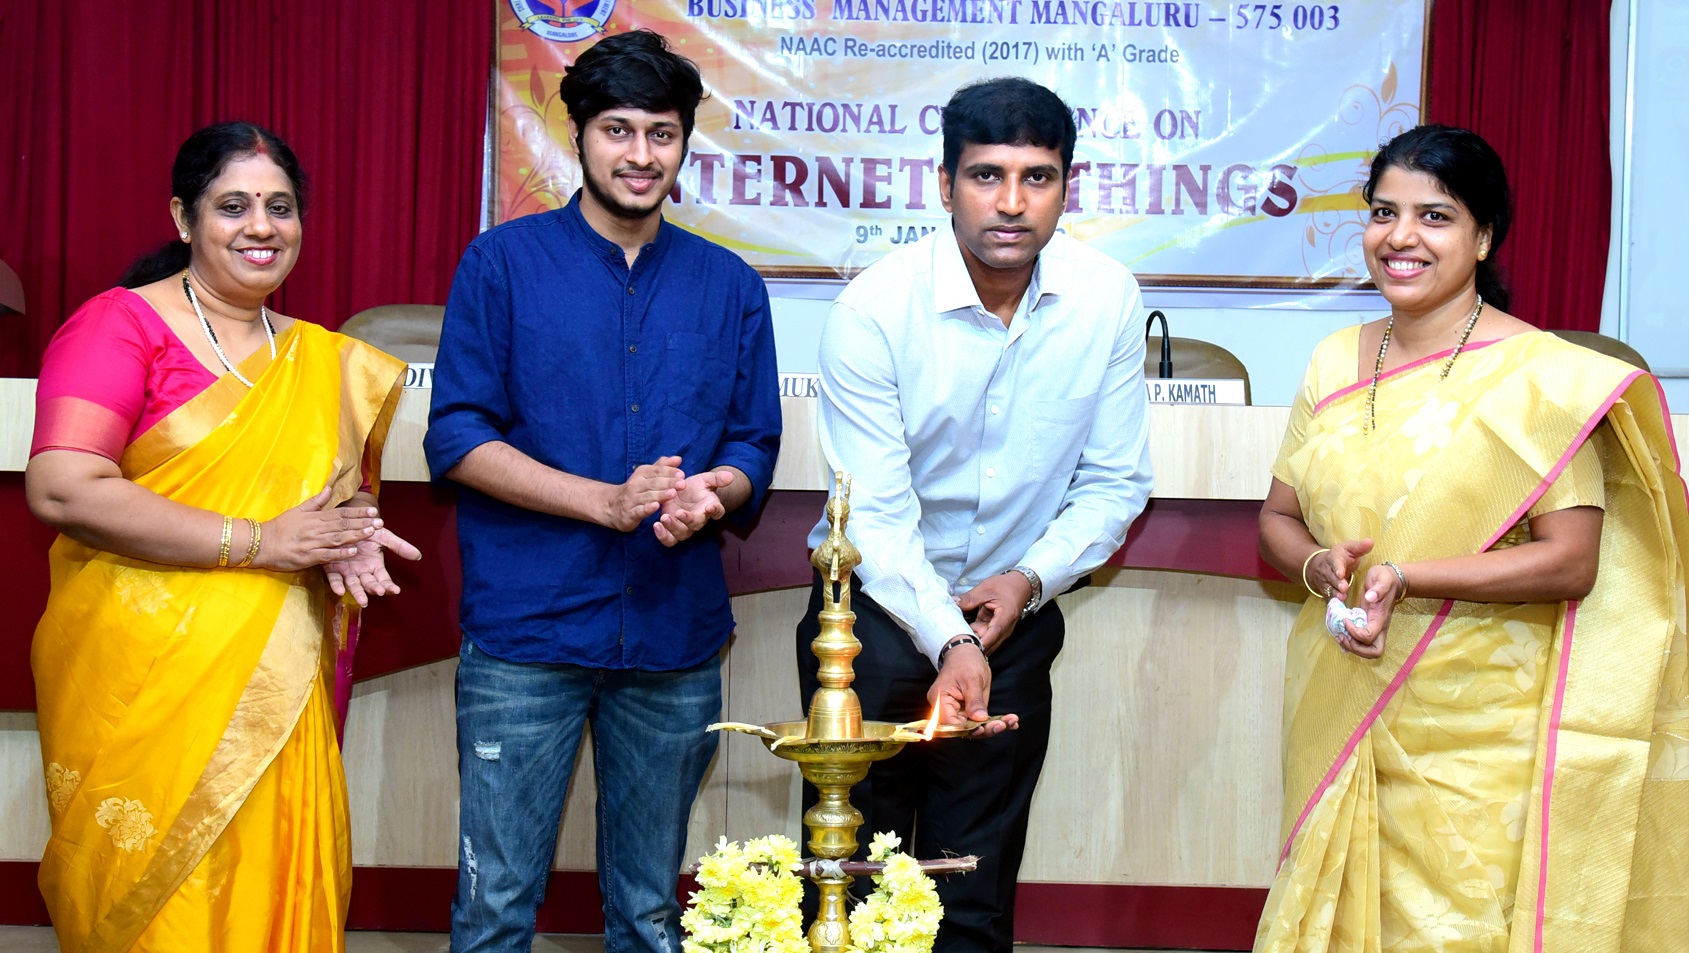 National Conference on the topic ” Internet of Things”